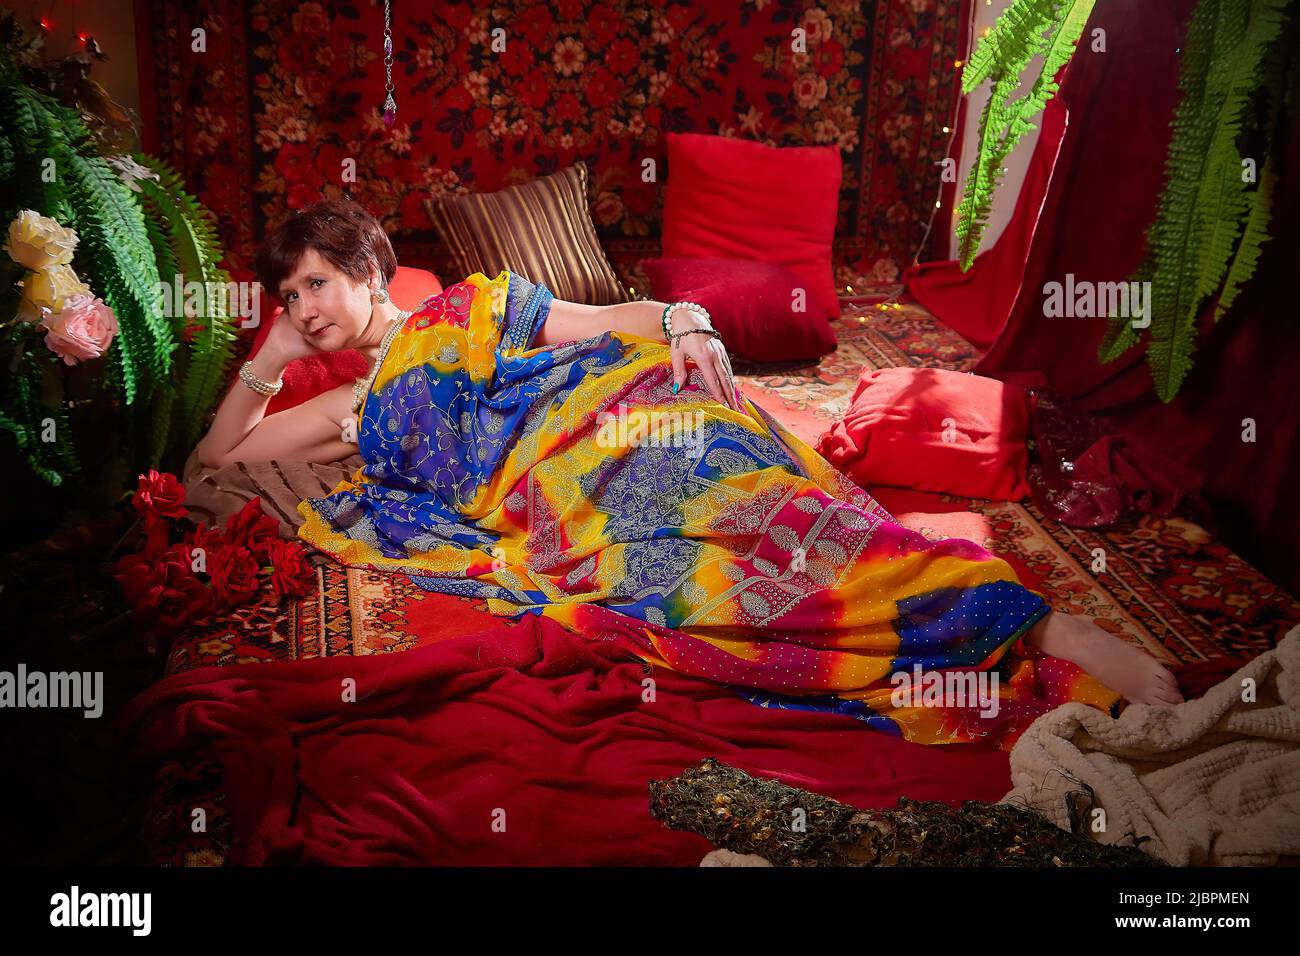 A beautiful European girl with short hair looking like an Arab woman in a red room in a harem. Photo shoot of an oriental style odalisque. A model Stock Photo